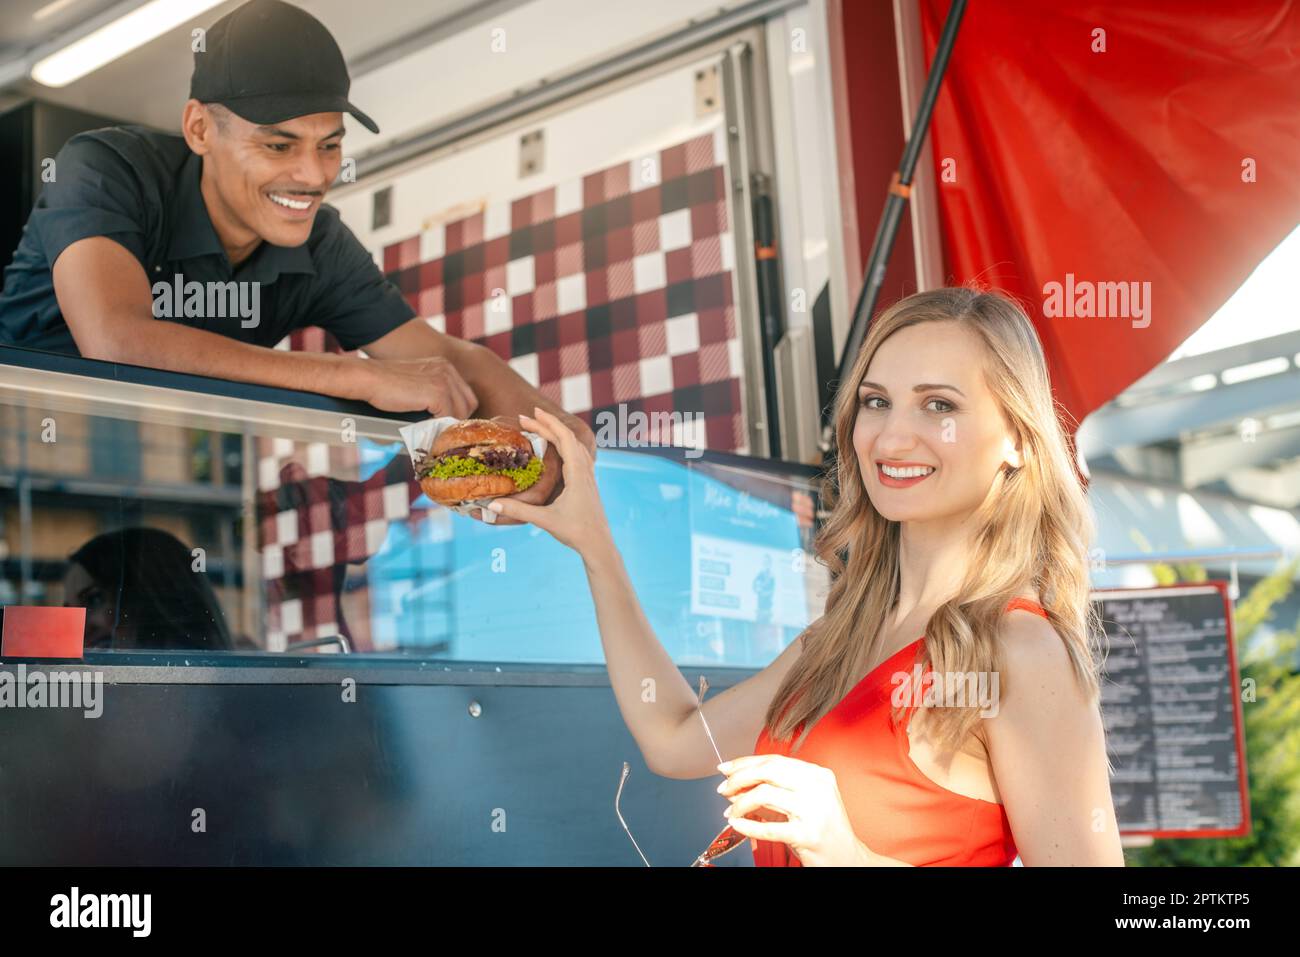 Friendly Cook in a food truck handing tasty burger over to woman customer Stock Photo